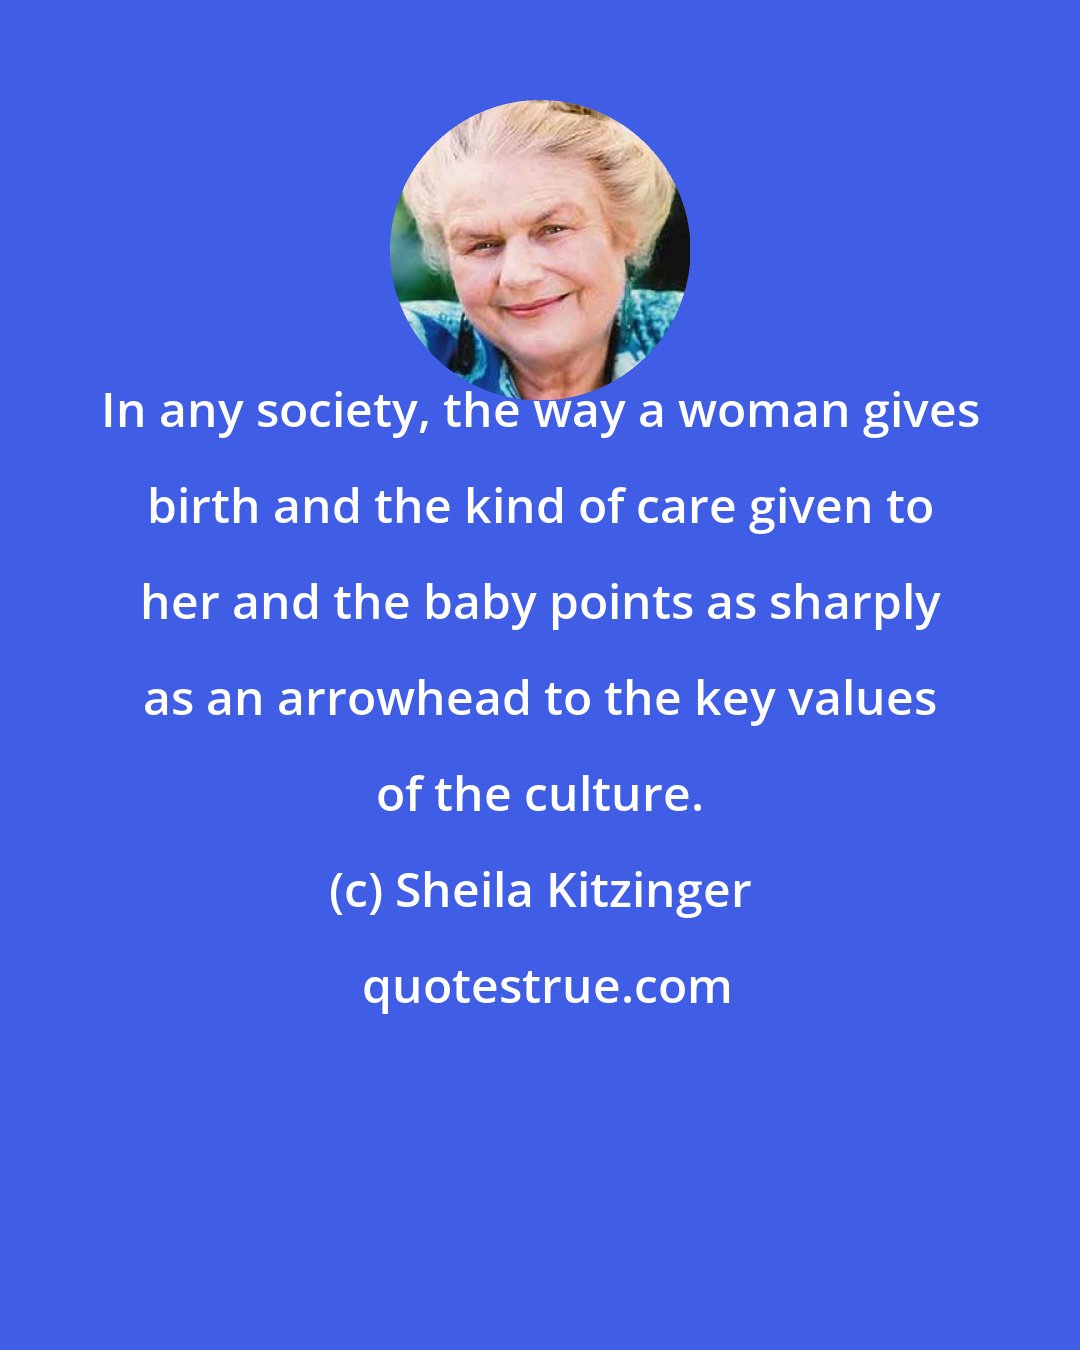 Sheila Kitzinger: In any society, the way a woman gives birth and the kind of care given to her and the baby points as sharply as an arrowhead to the key values of the culture.